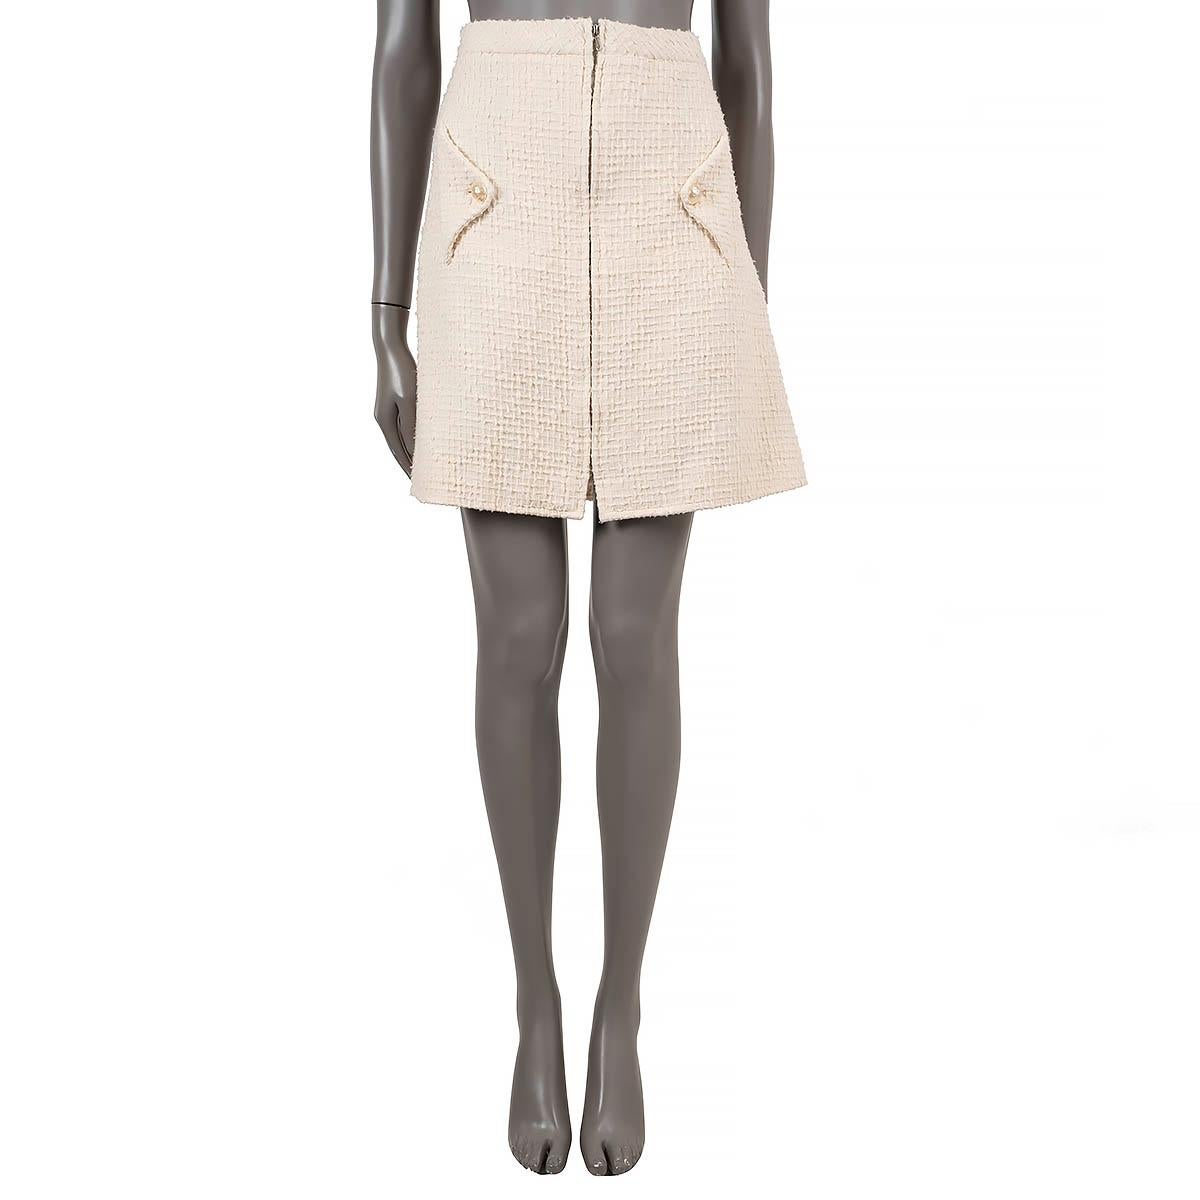 100% authentic Chanel textured tweed skirt in cream cotton (100%). Features a flared, knee-length silhouette and two flap pockets with faux pearl buttons at the waist. Opens with a concealed zipper in the back and is lines in silk (100%). Has been